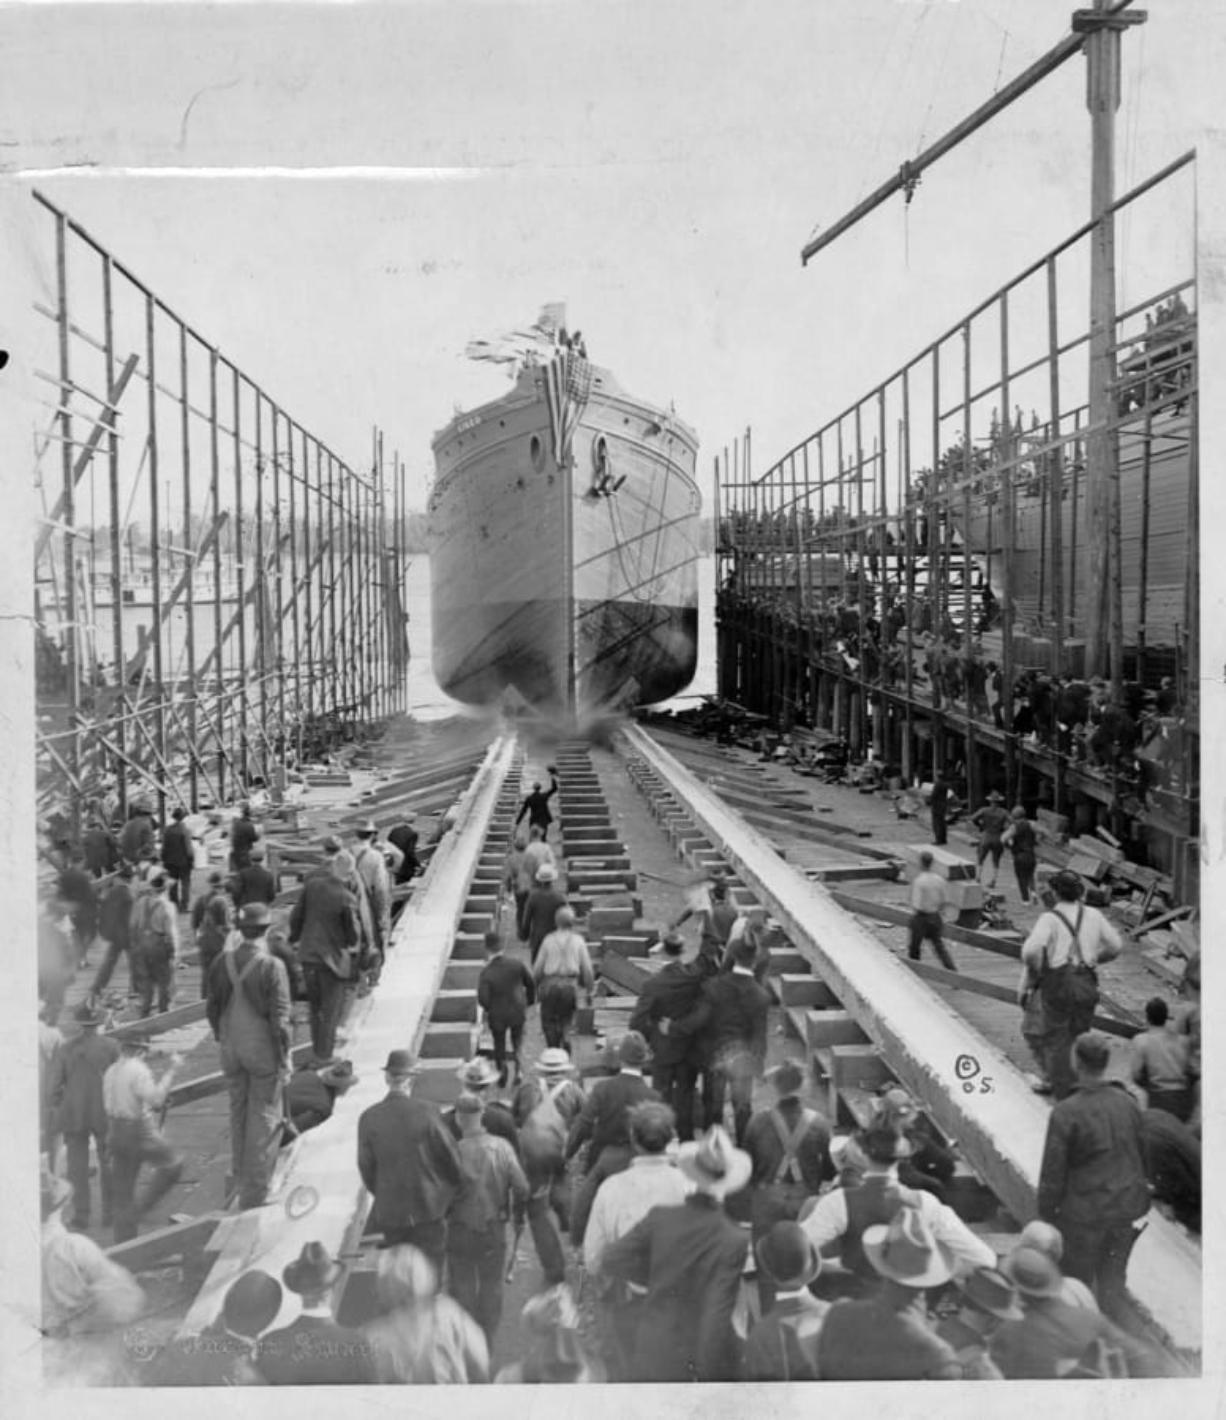 The S.S. Kineo was a wooden cargo ship launched at the Standifer Wood Shipyard in 1918 during World War I. Near today&#039;s Port of Vancouver, the city&#039;s first shipyard launched 450 wooden ships before it changed to building steel cargo ships and tankers.